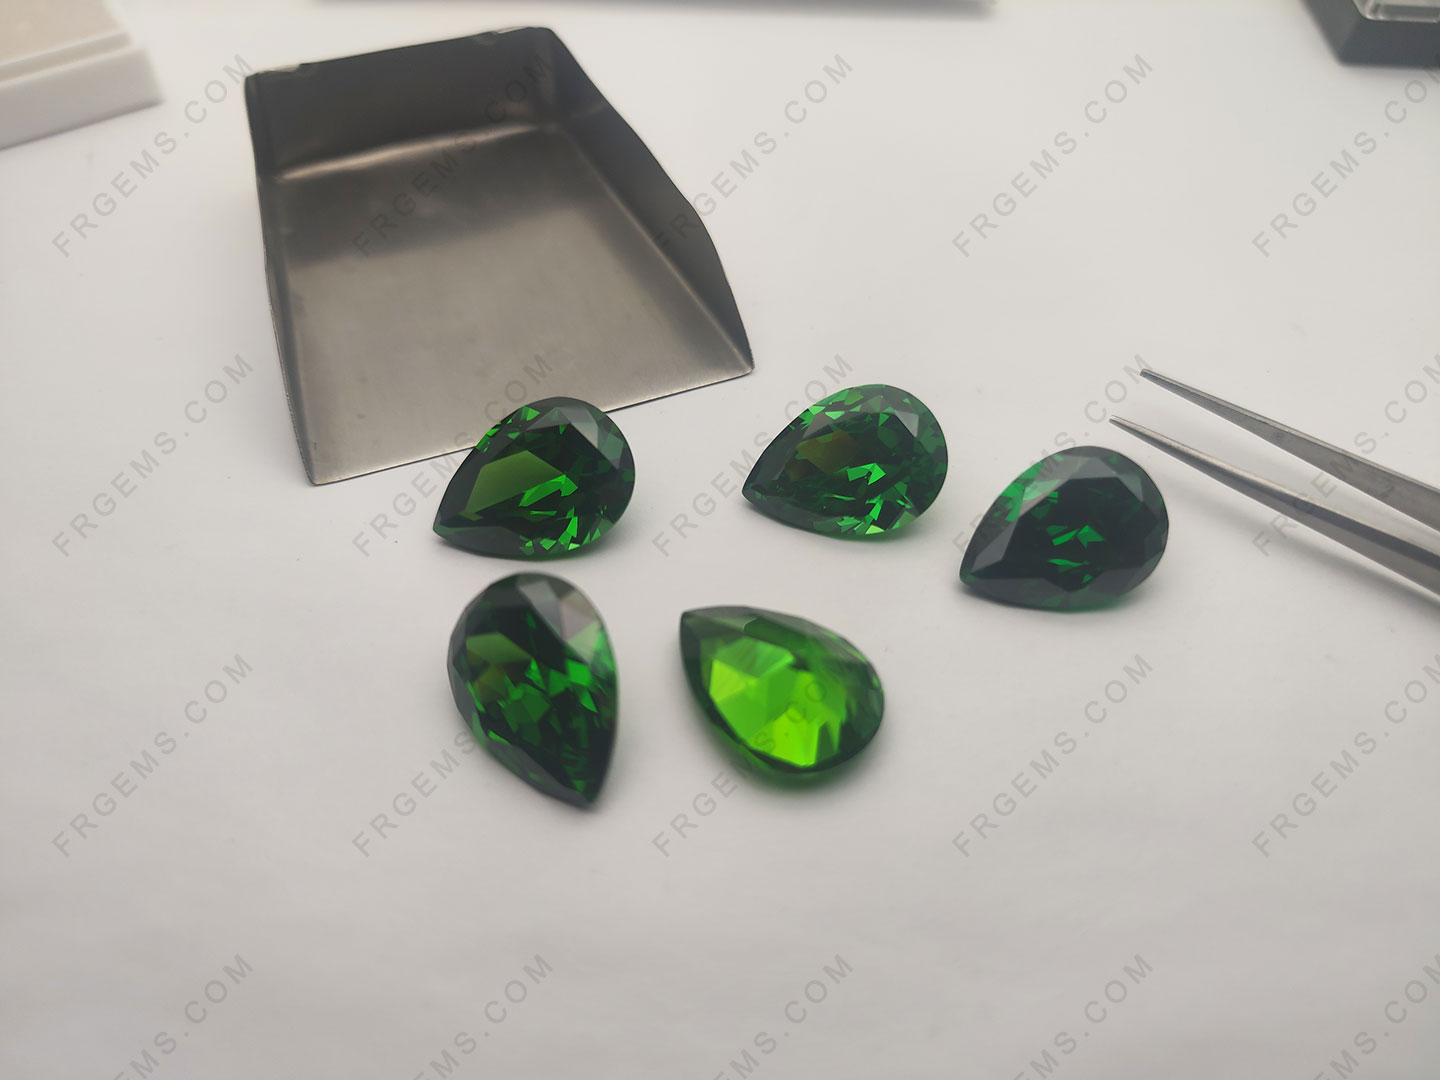 wholesale Loose Cubic Zirconia CZ Emerald Green Color Oval shaped large size 25x18mm Faceted gemstones